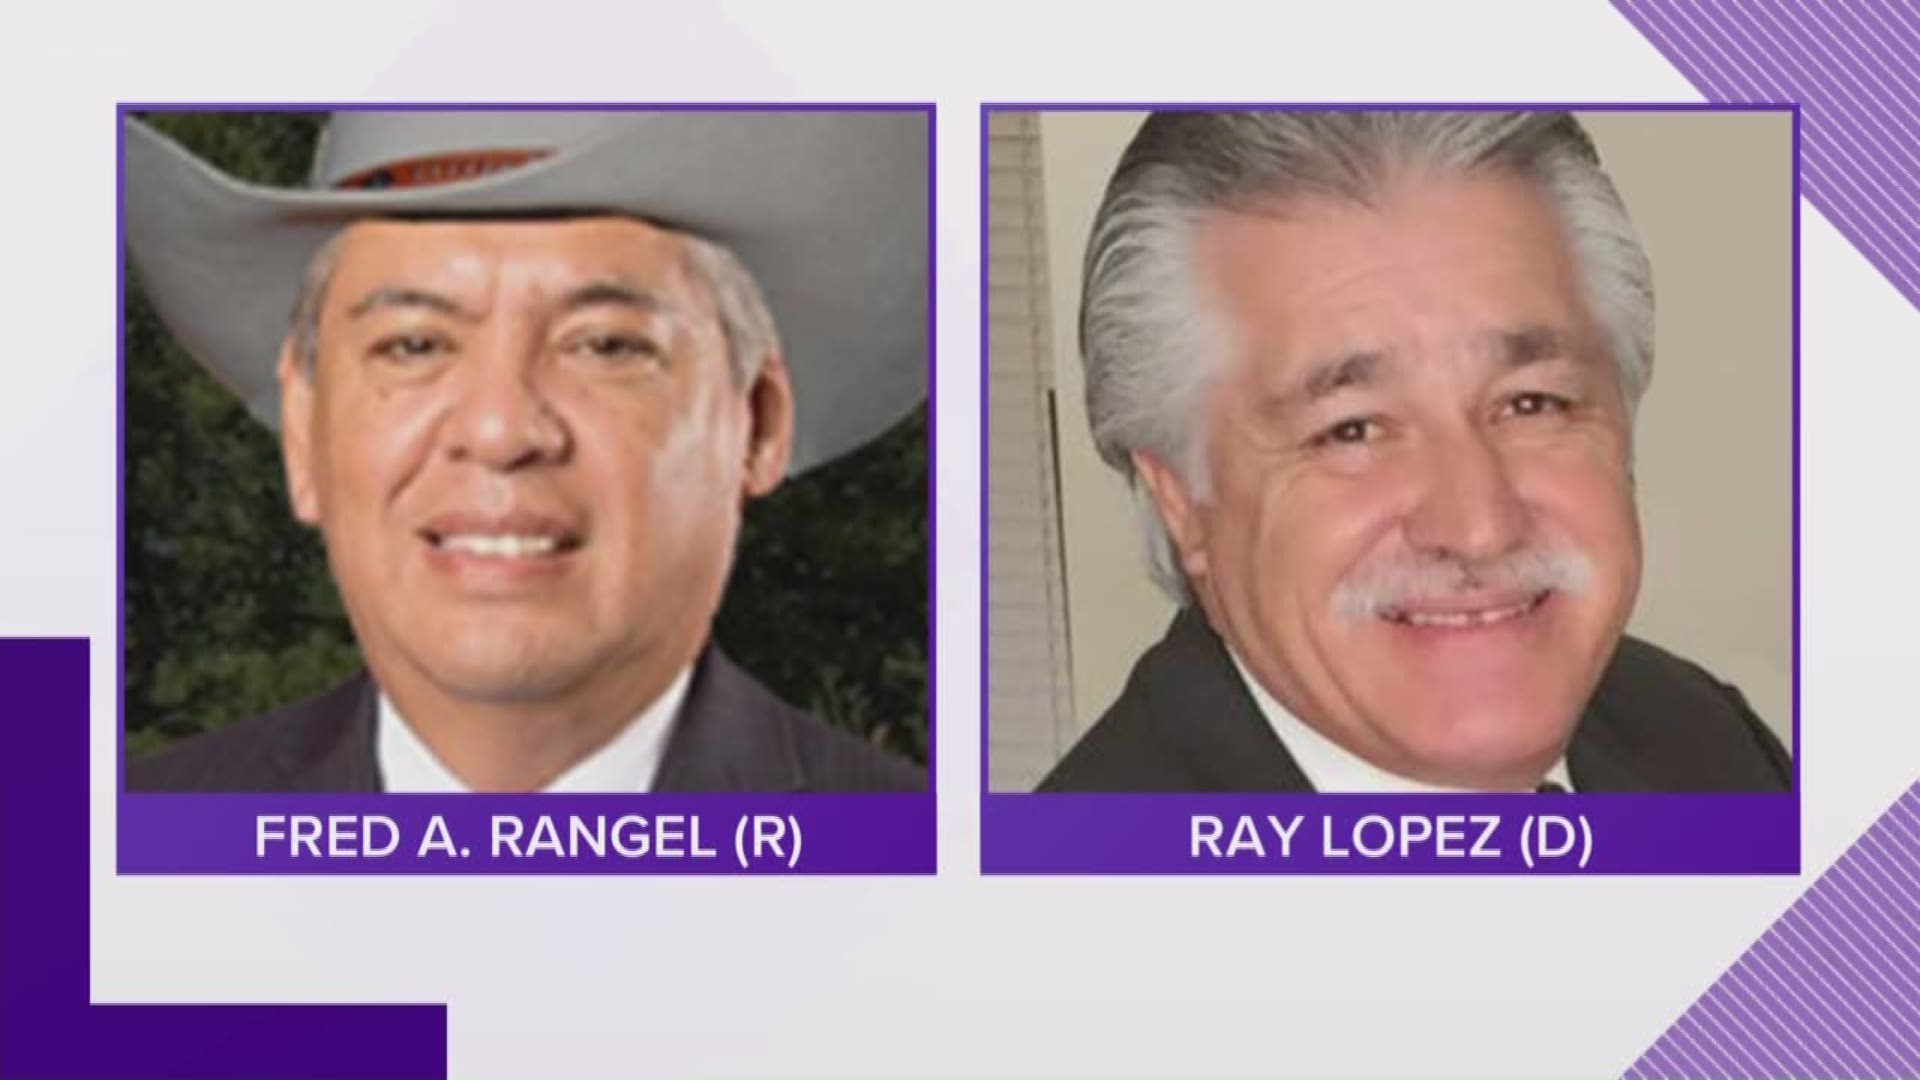 The special election for Texas House Seat 125 will be decided Tuesday, March 12. Republican Fred Rangel and Democrat Ray Lopez are facing off to replace Justin Rodriguez.